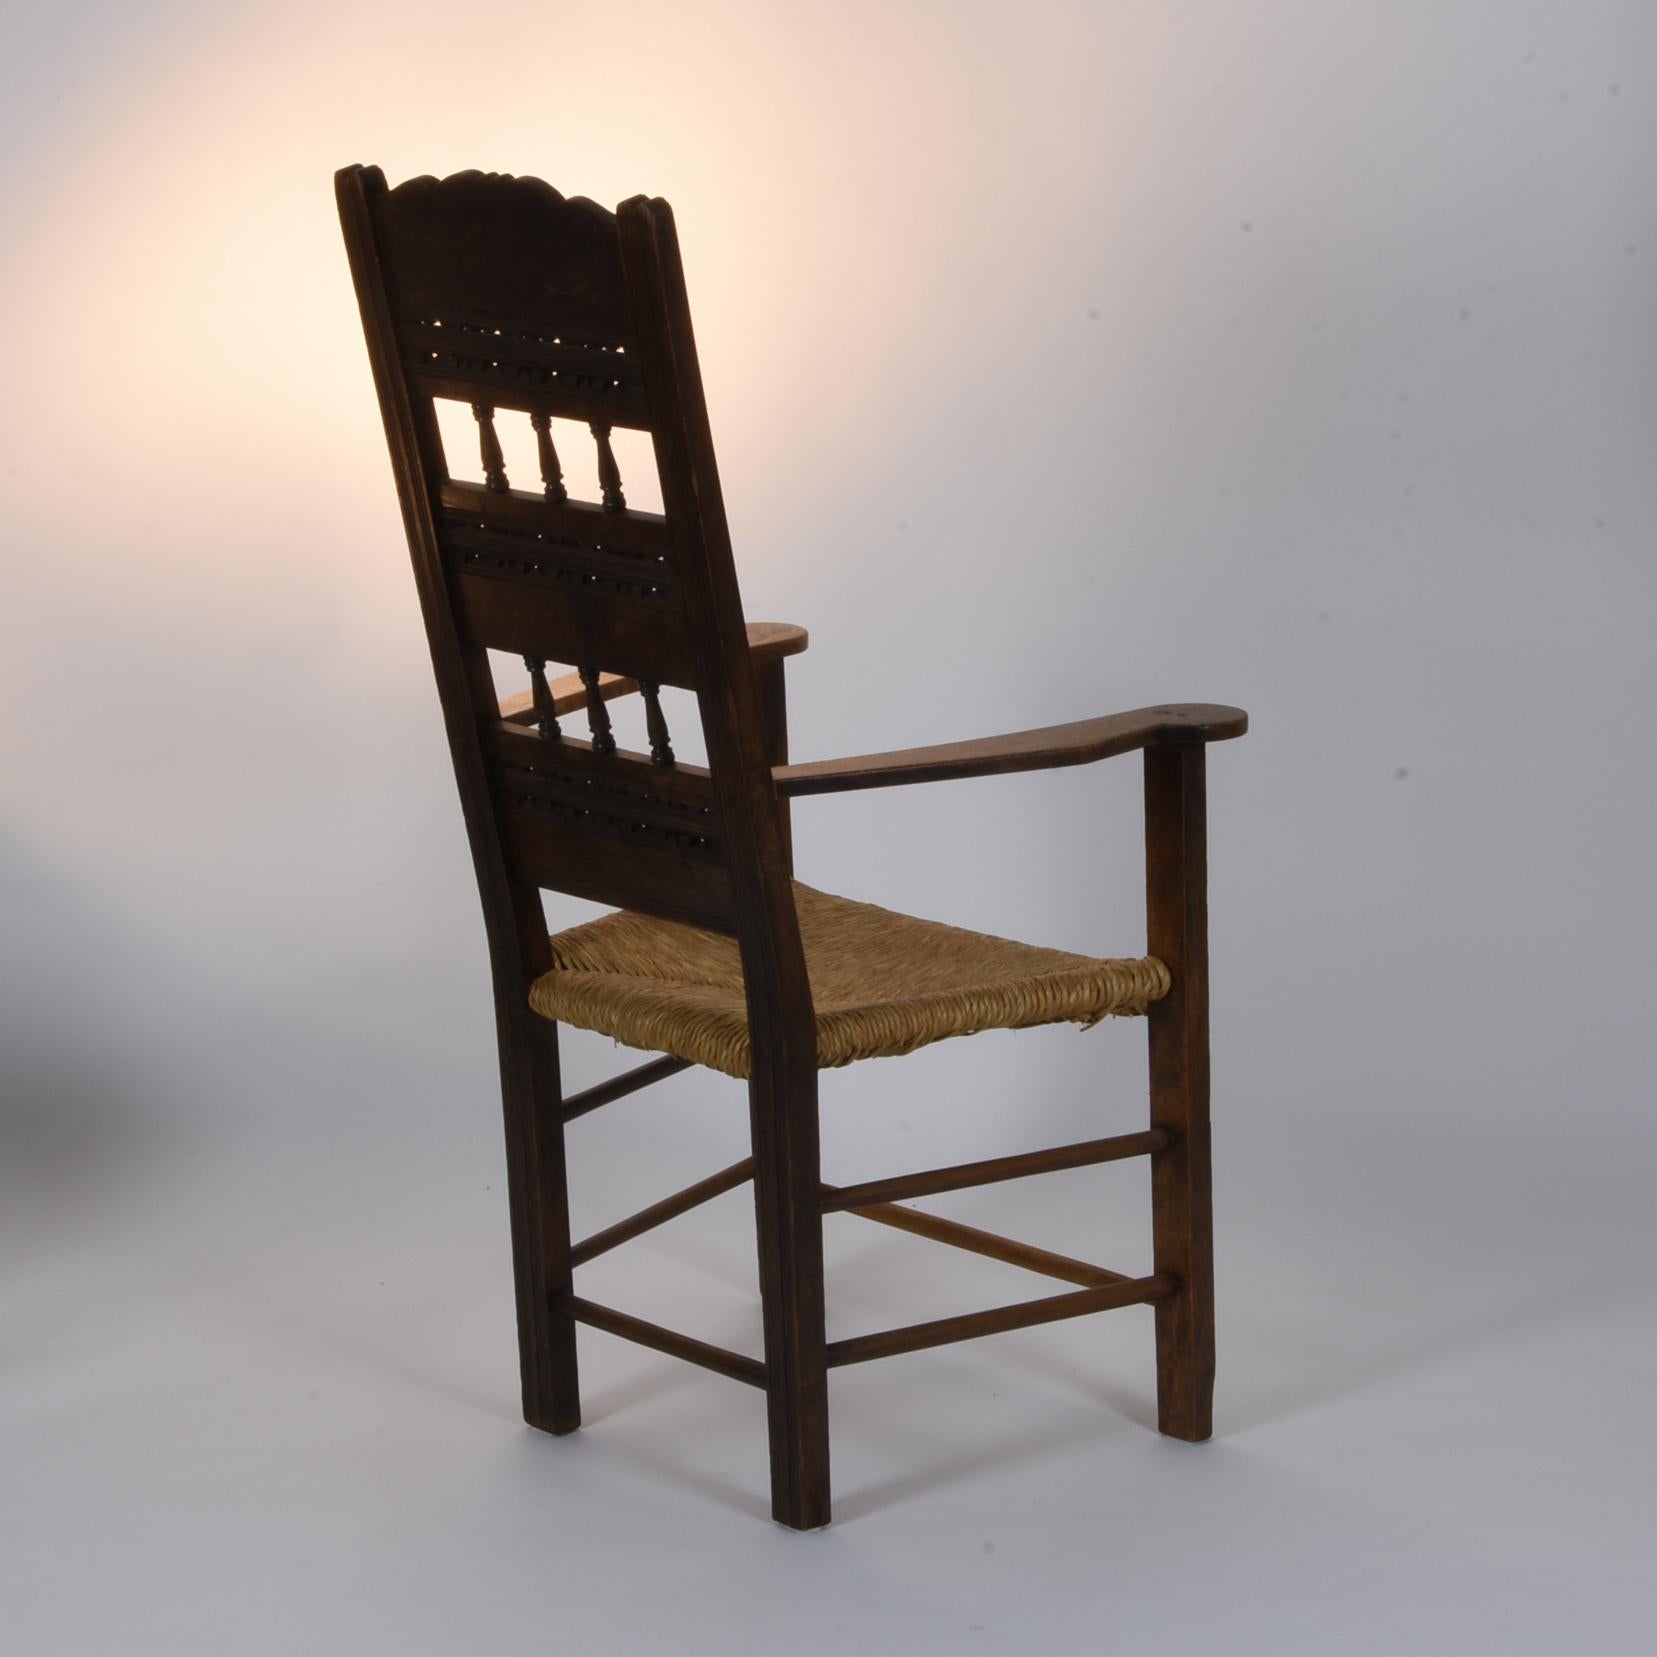 Early 20th Century Armchair with High Backrest Oakwood, 1916